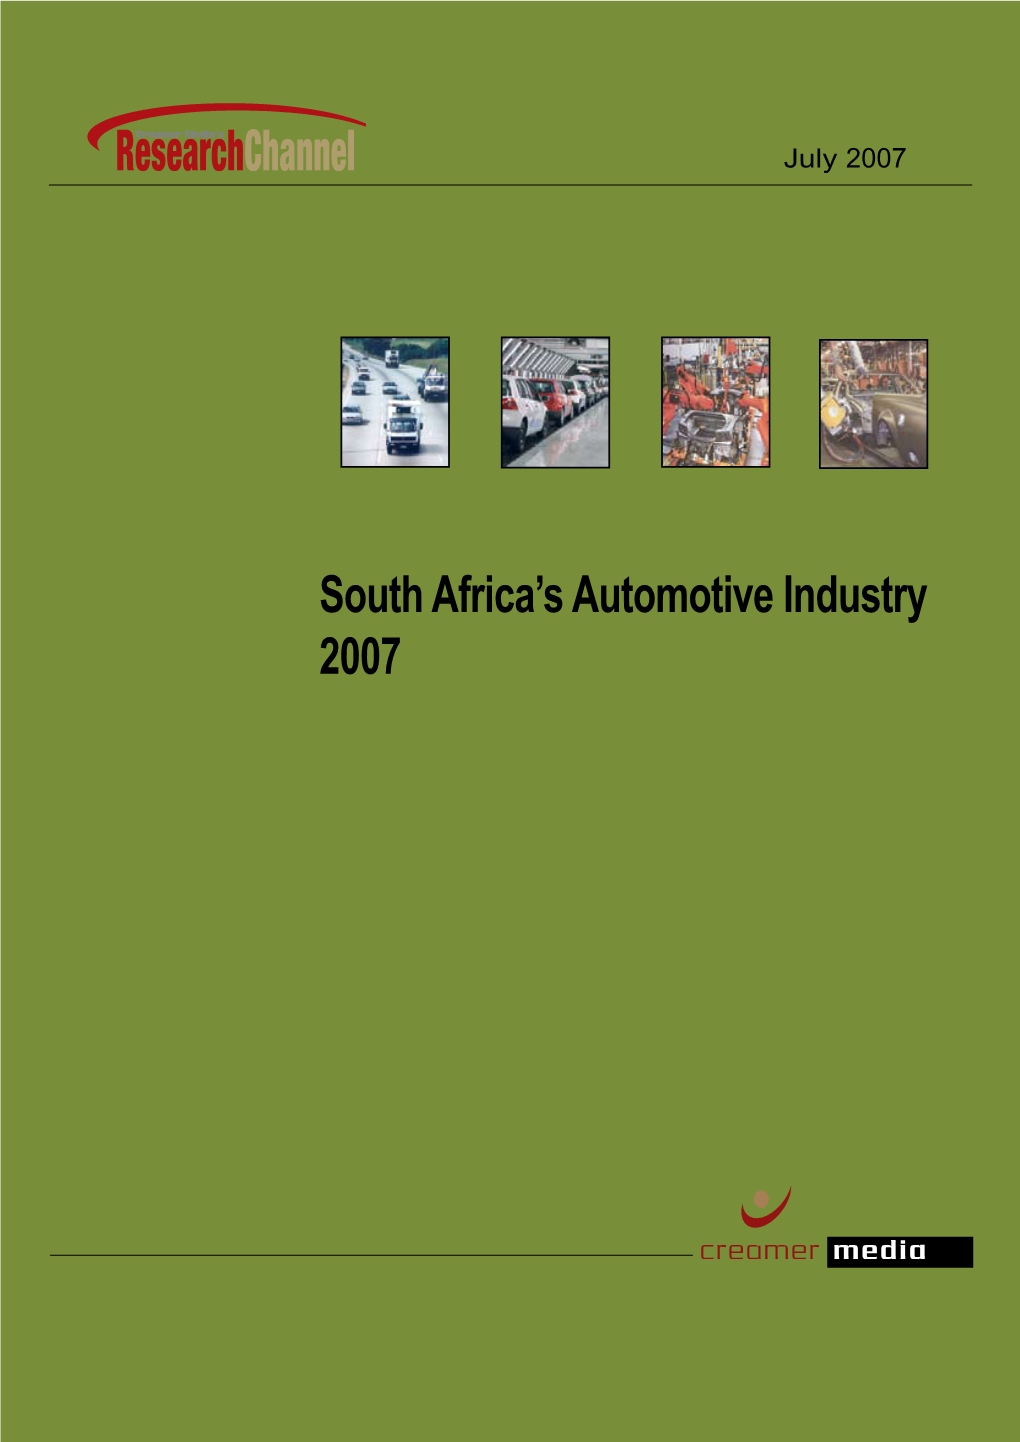 South Africa's Automotive Industry 2007